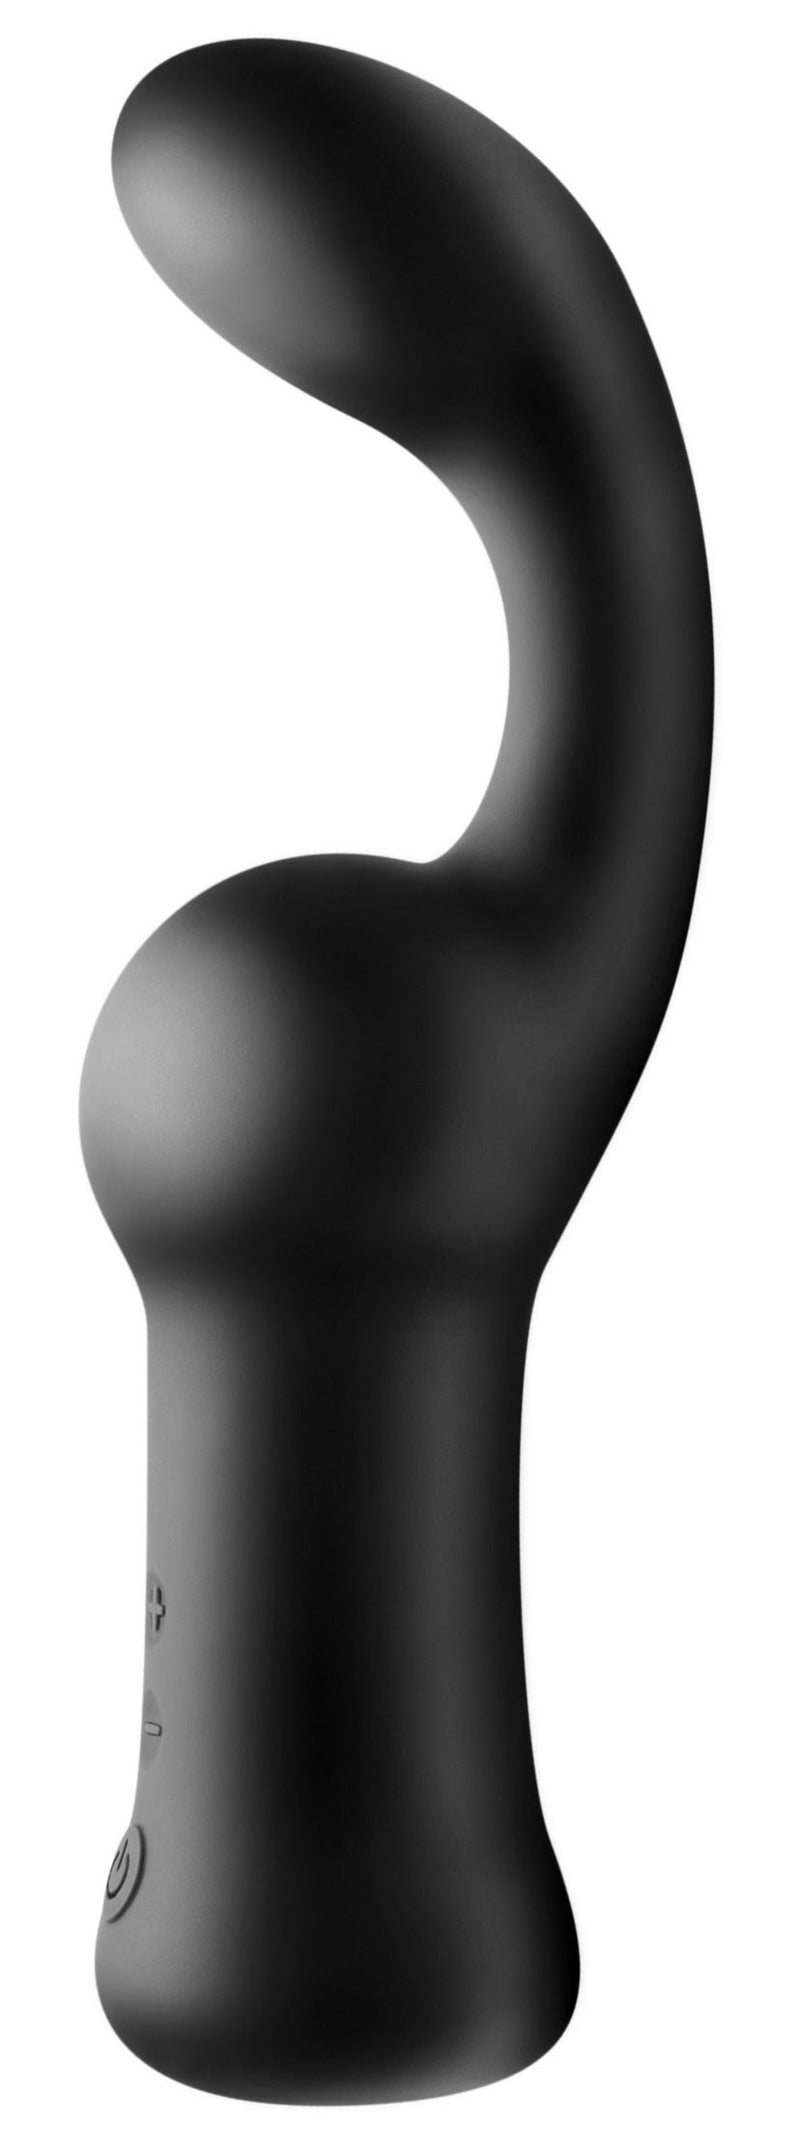 Pleaser Hook 10X Silicone Anal Vibrator vibesextoys from Master Series